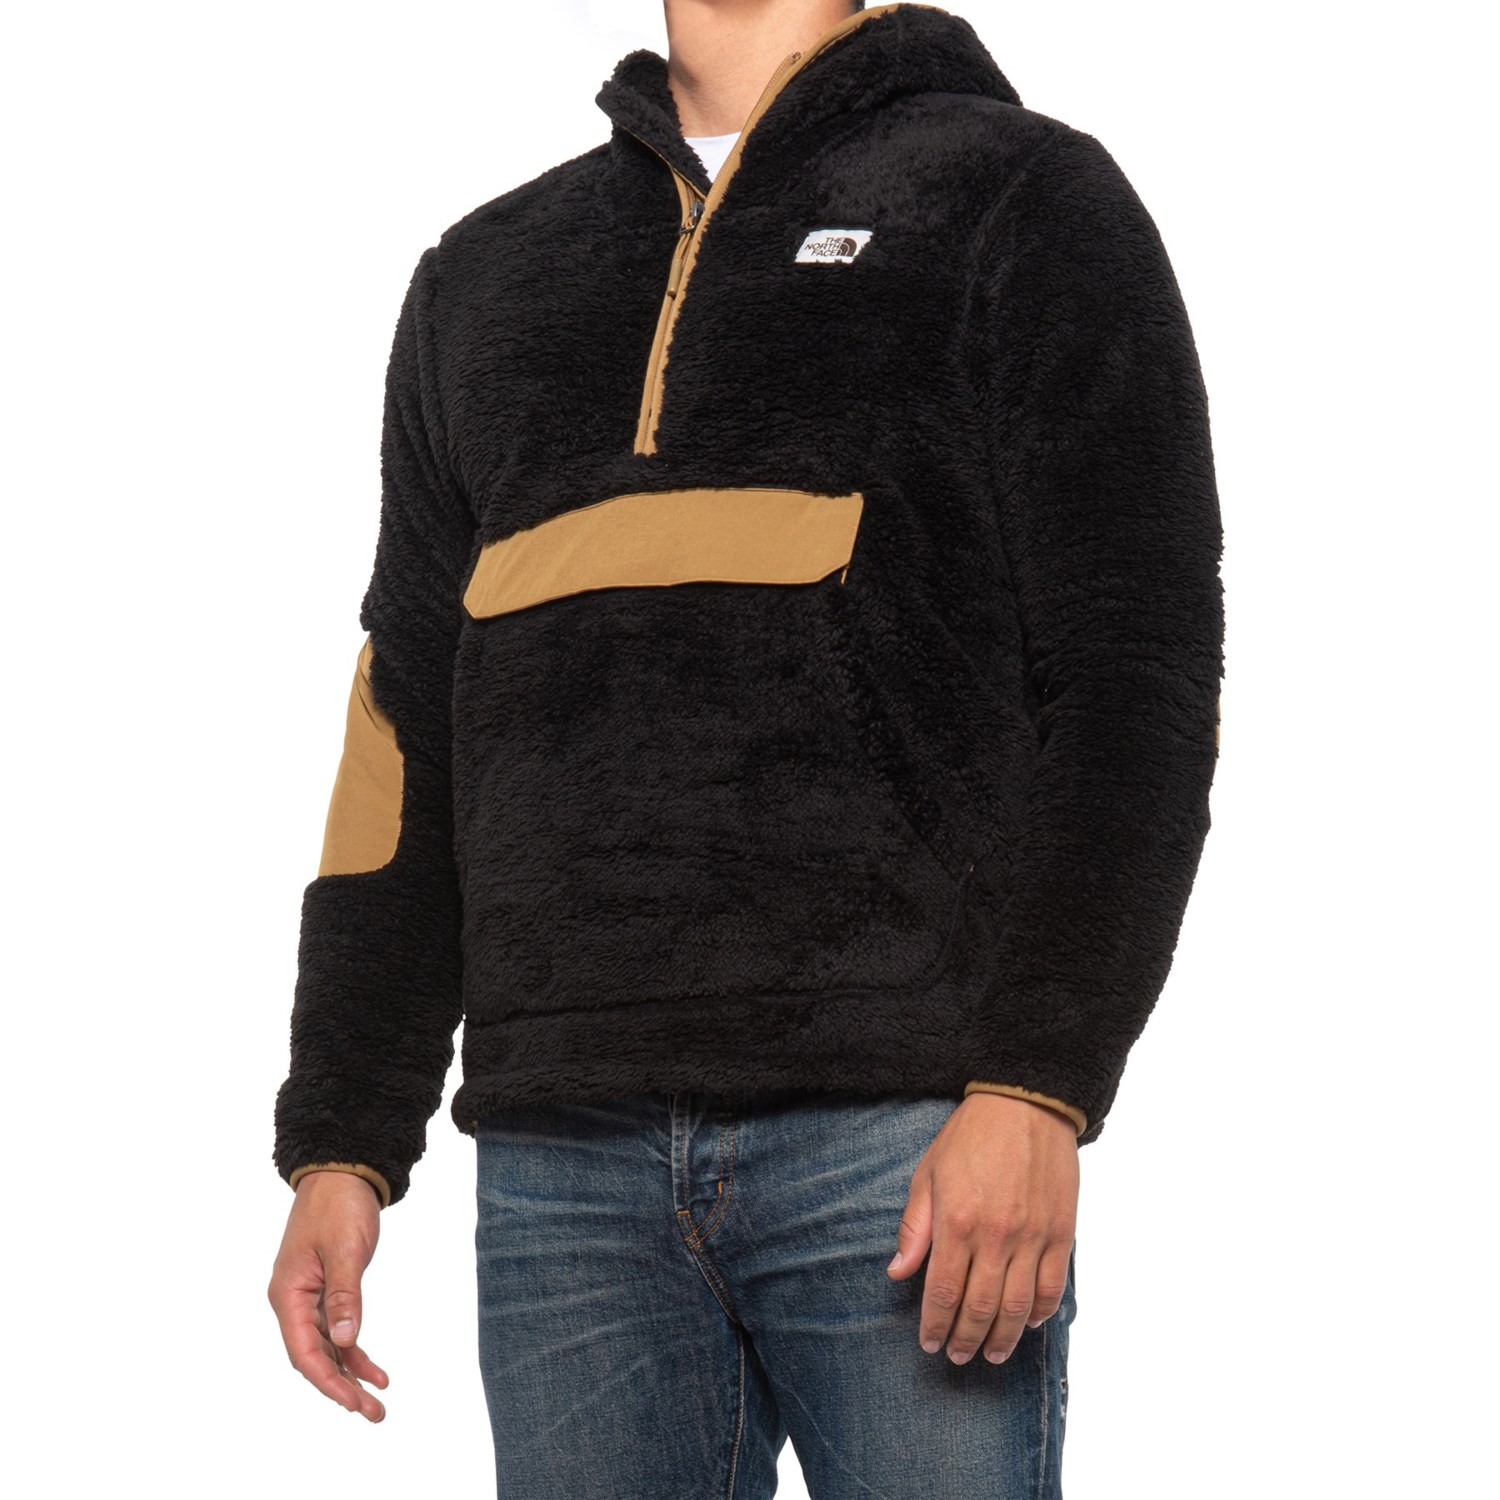 The North Face Campshire Pullover 